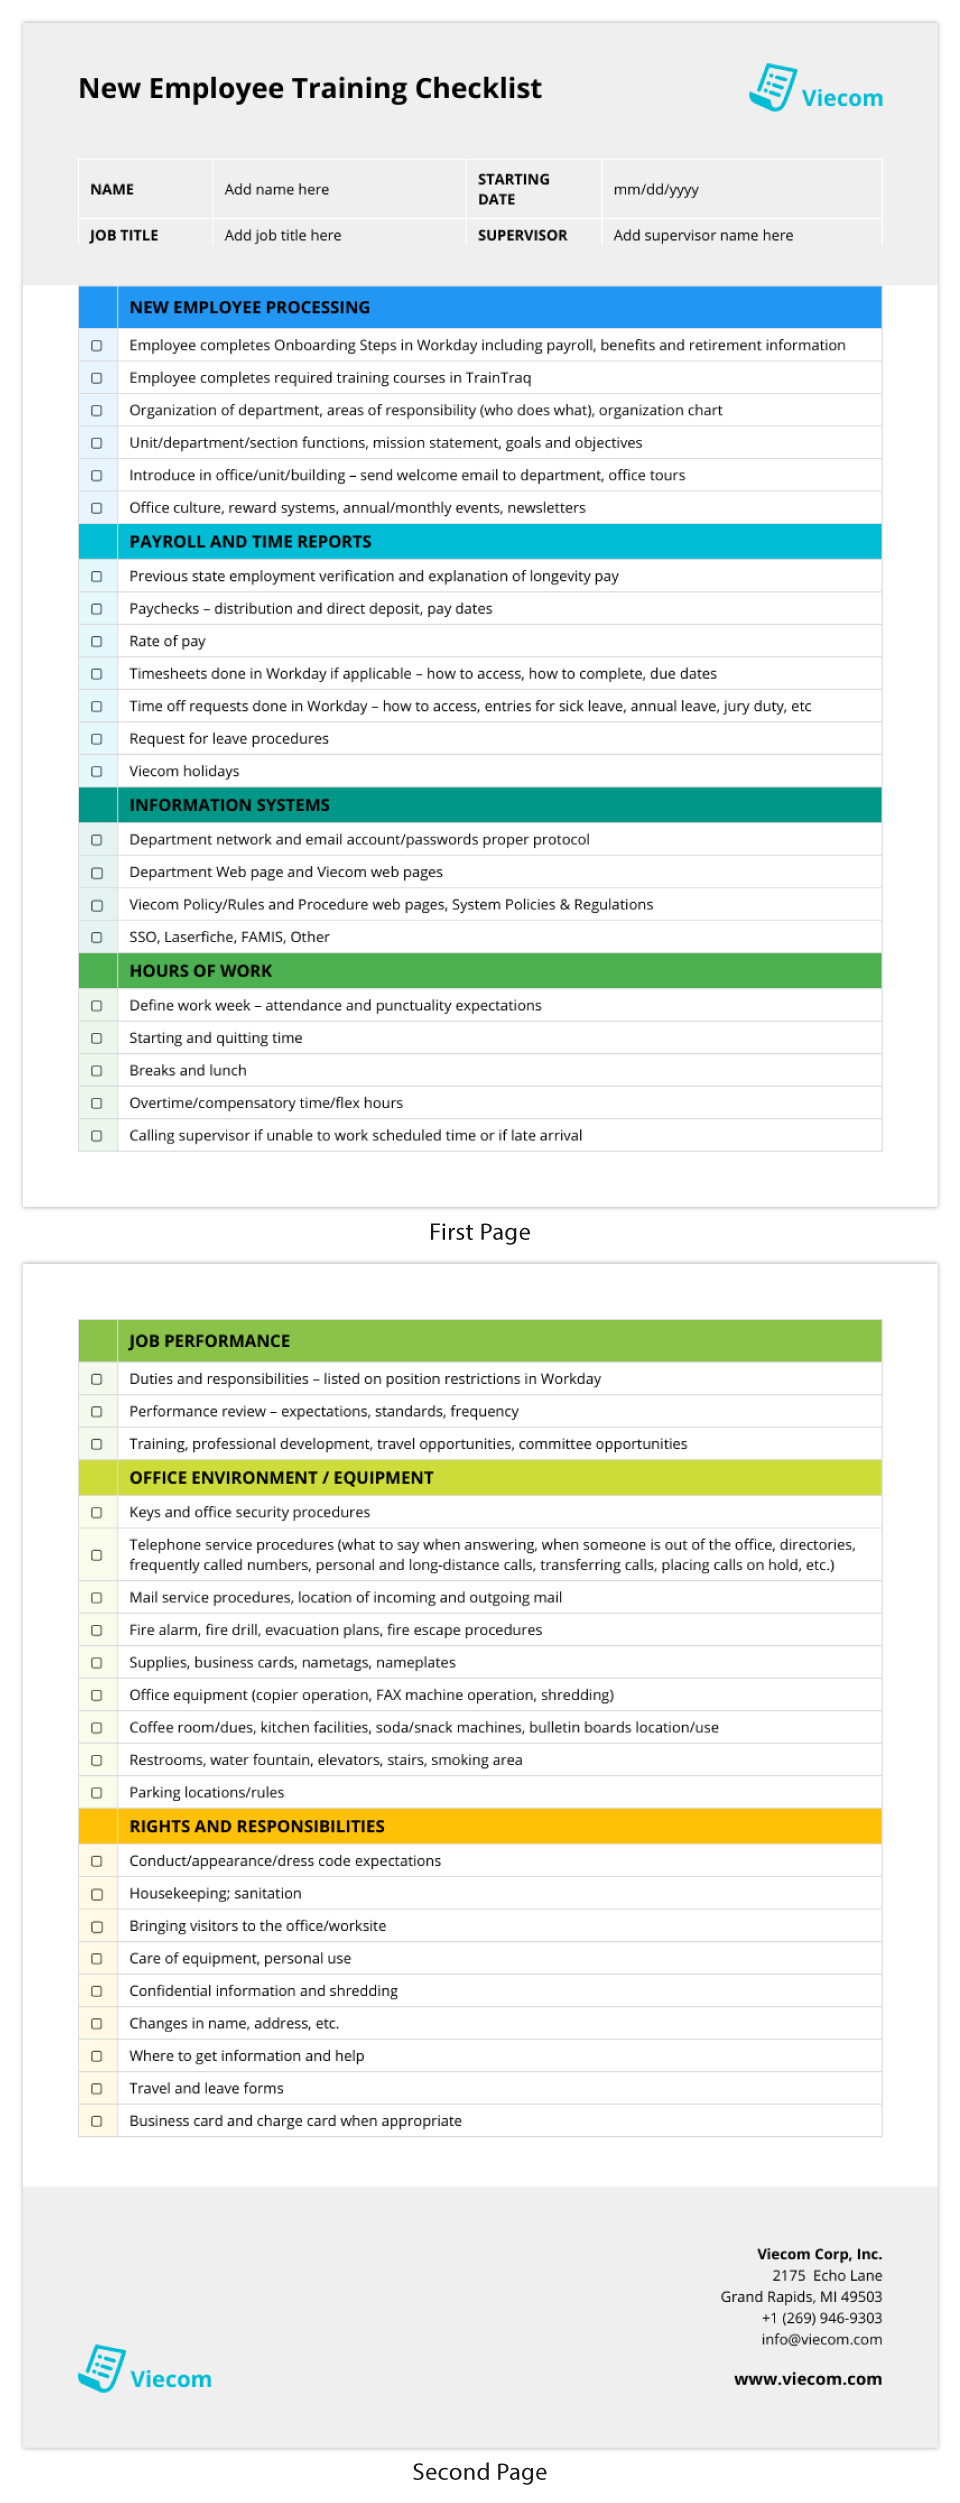 New Hire Onboarding HR Checklist Template Throughout New Employee Onboarding Checklist Template Intended For New Employee Onboarding Checklist Template